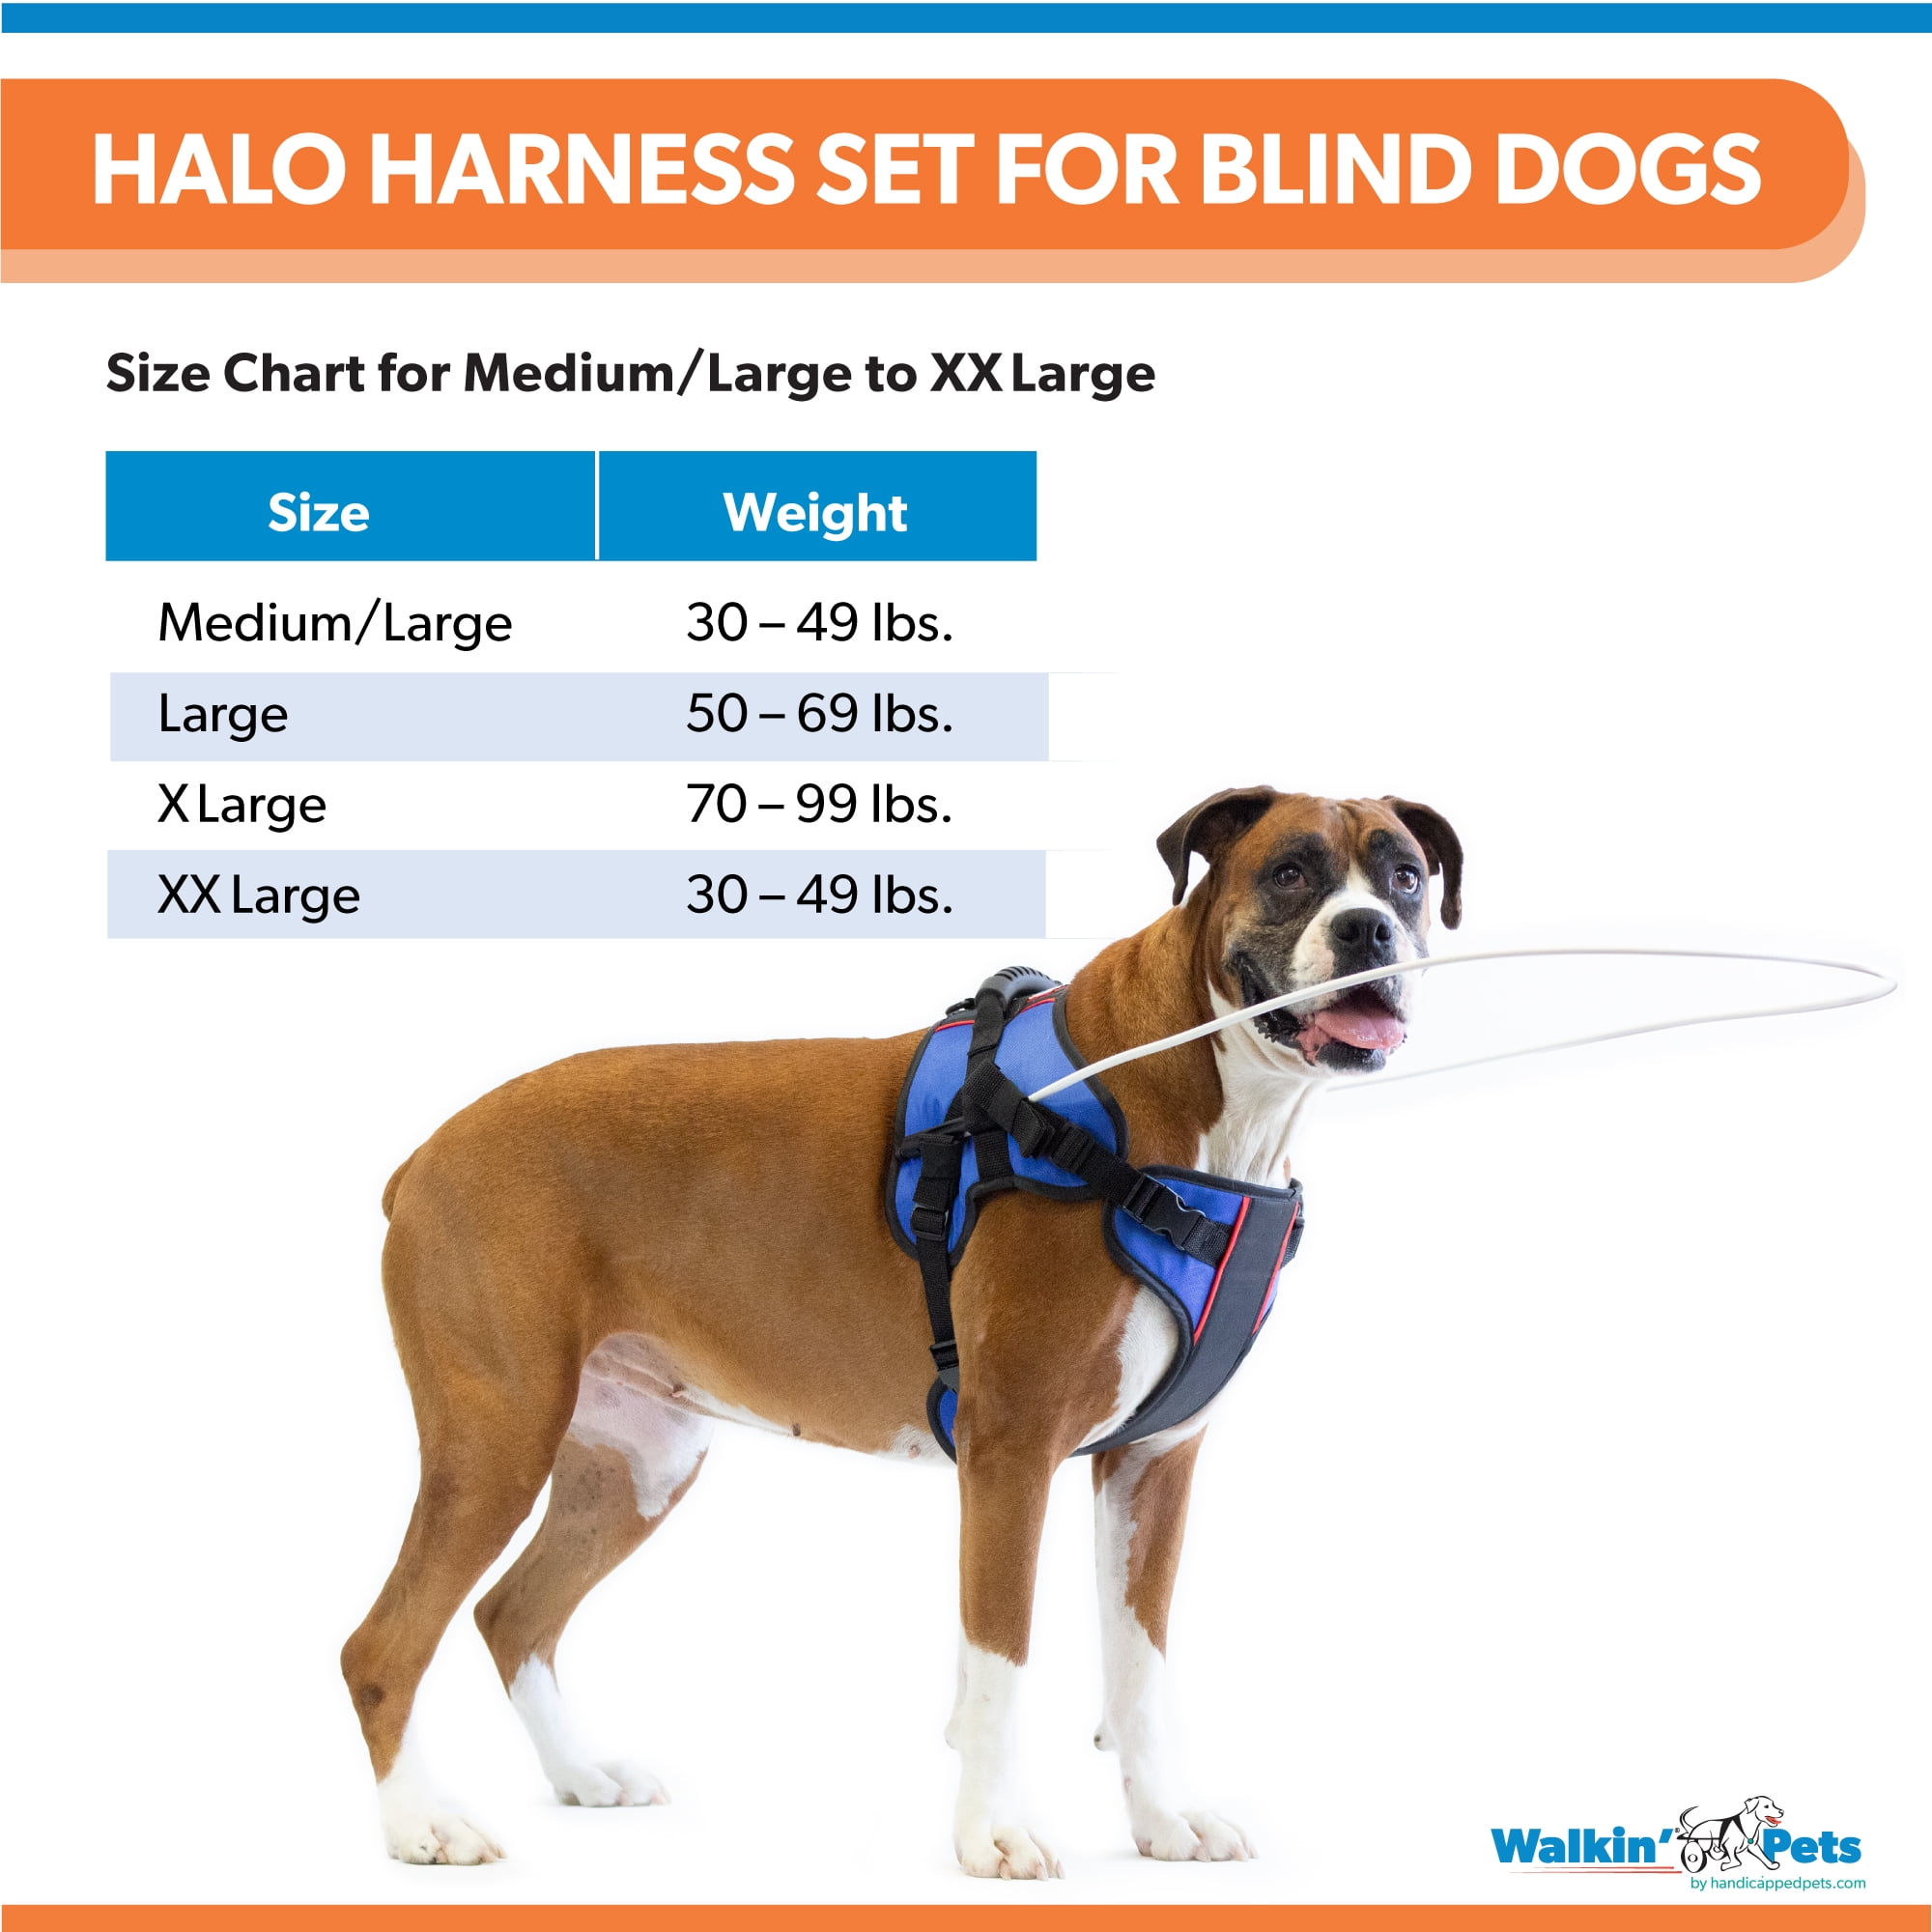 Lightweight and Flexible Harness for Blind Dogs Adjustable for a Custom Fit Walkin' Halo Harness for Pets 